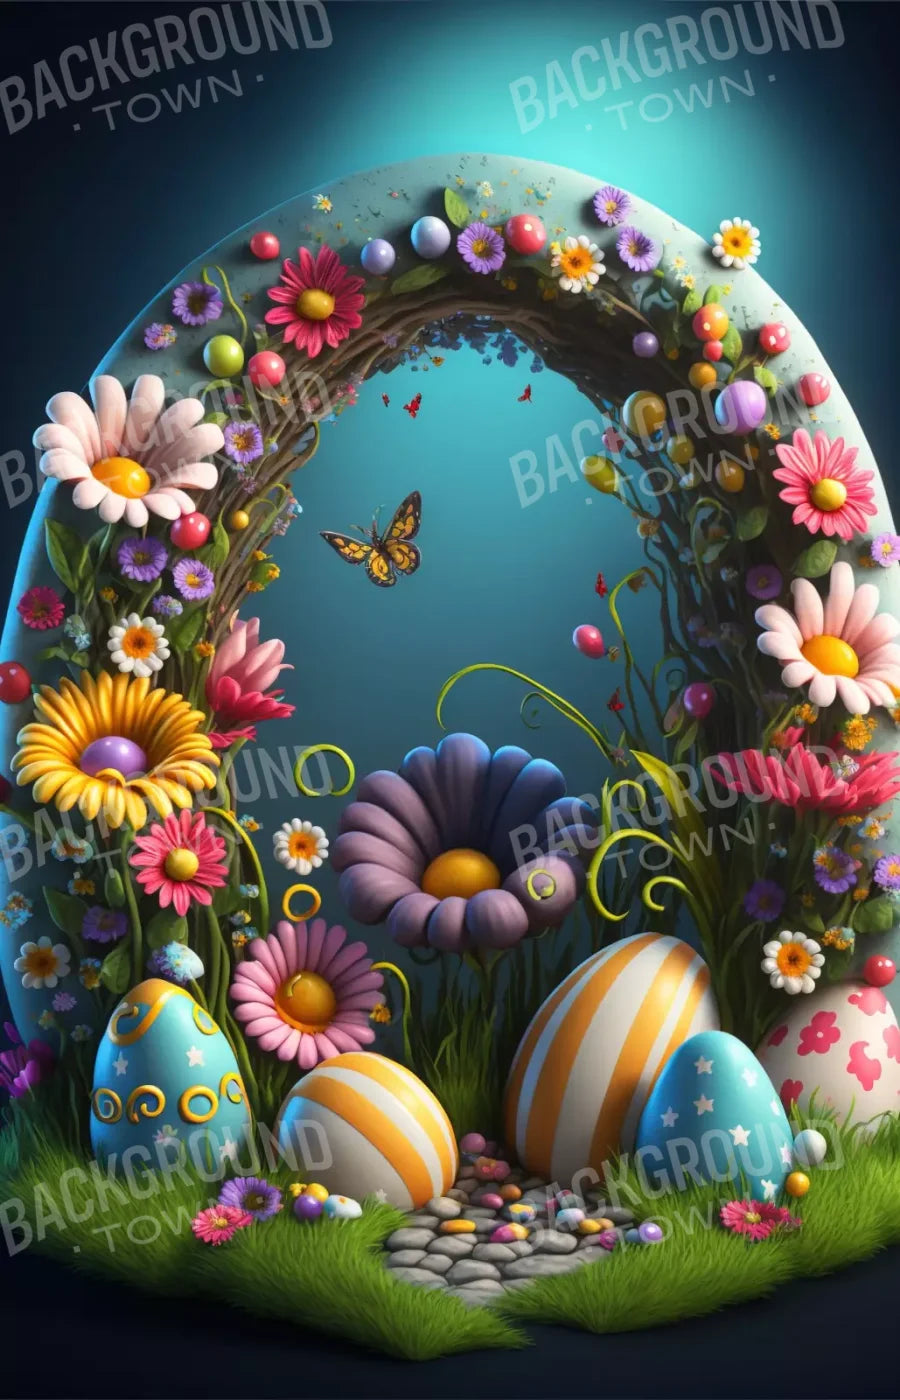 Easter Egg Arch 8X12 Ultracloth ( 96 X 144 Inch ) Backdrop